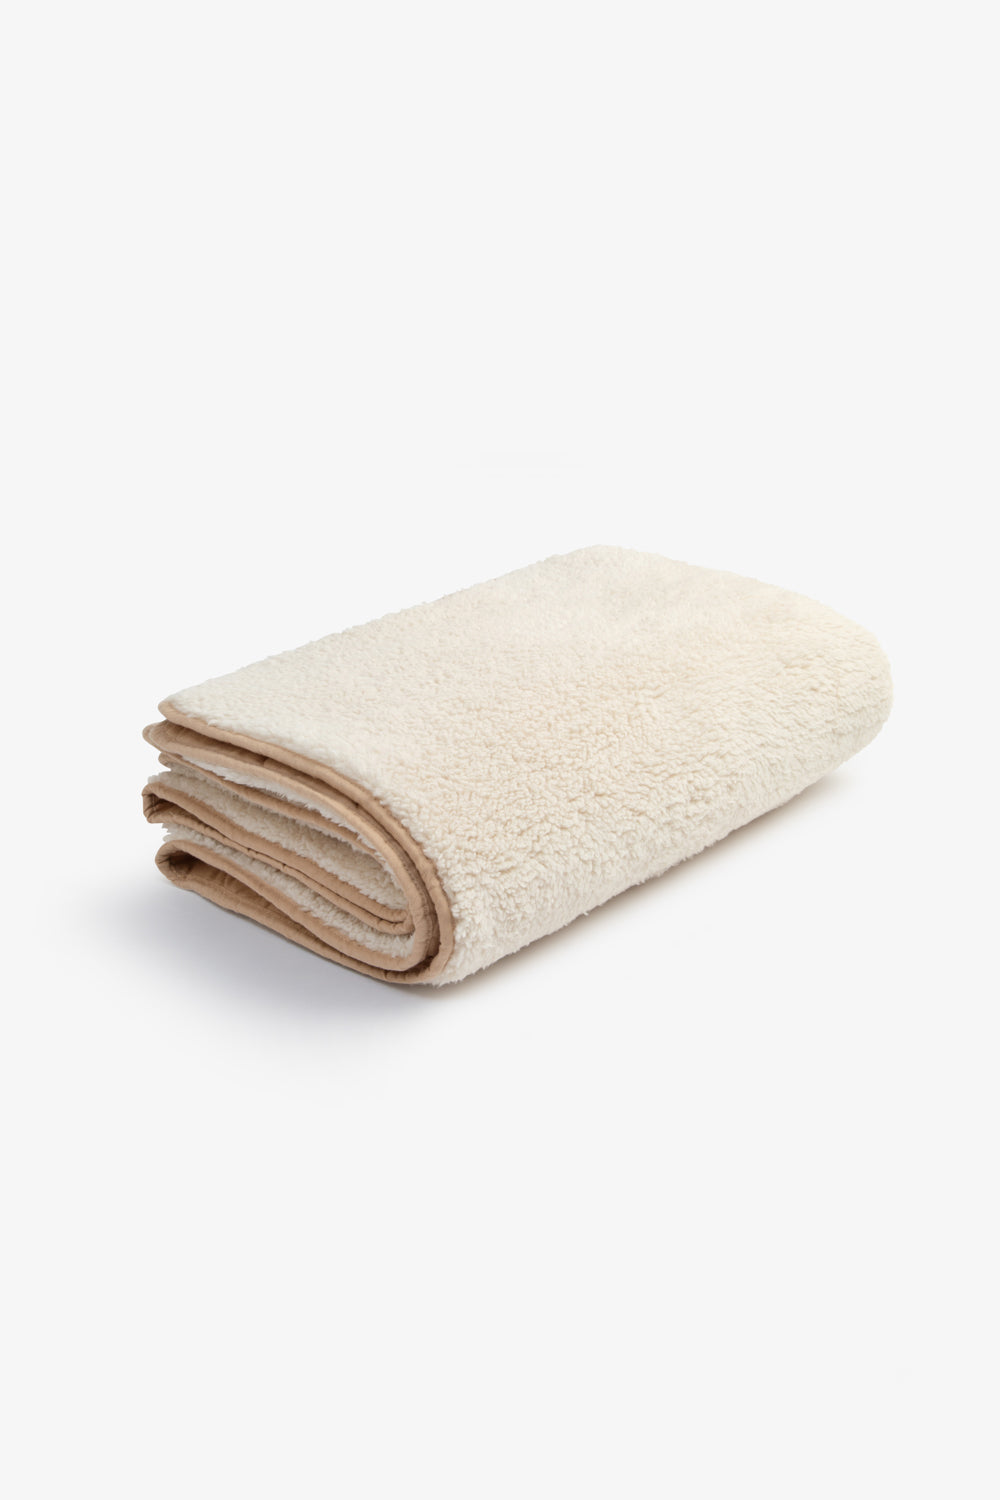 Cream Plush Sherpa/ quilted reversible blanket